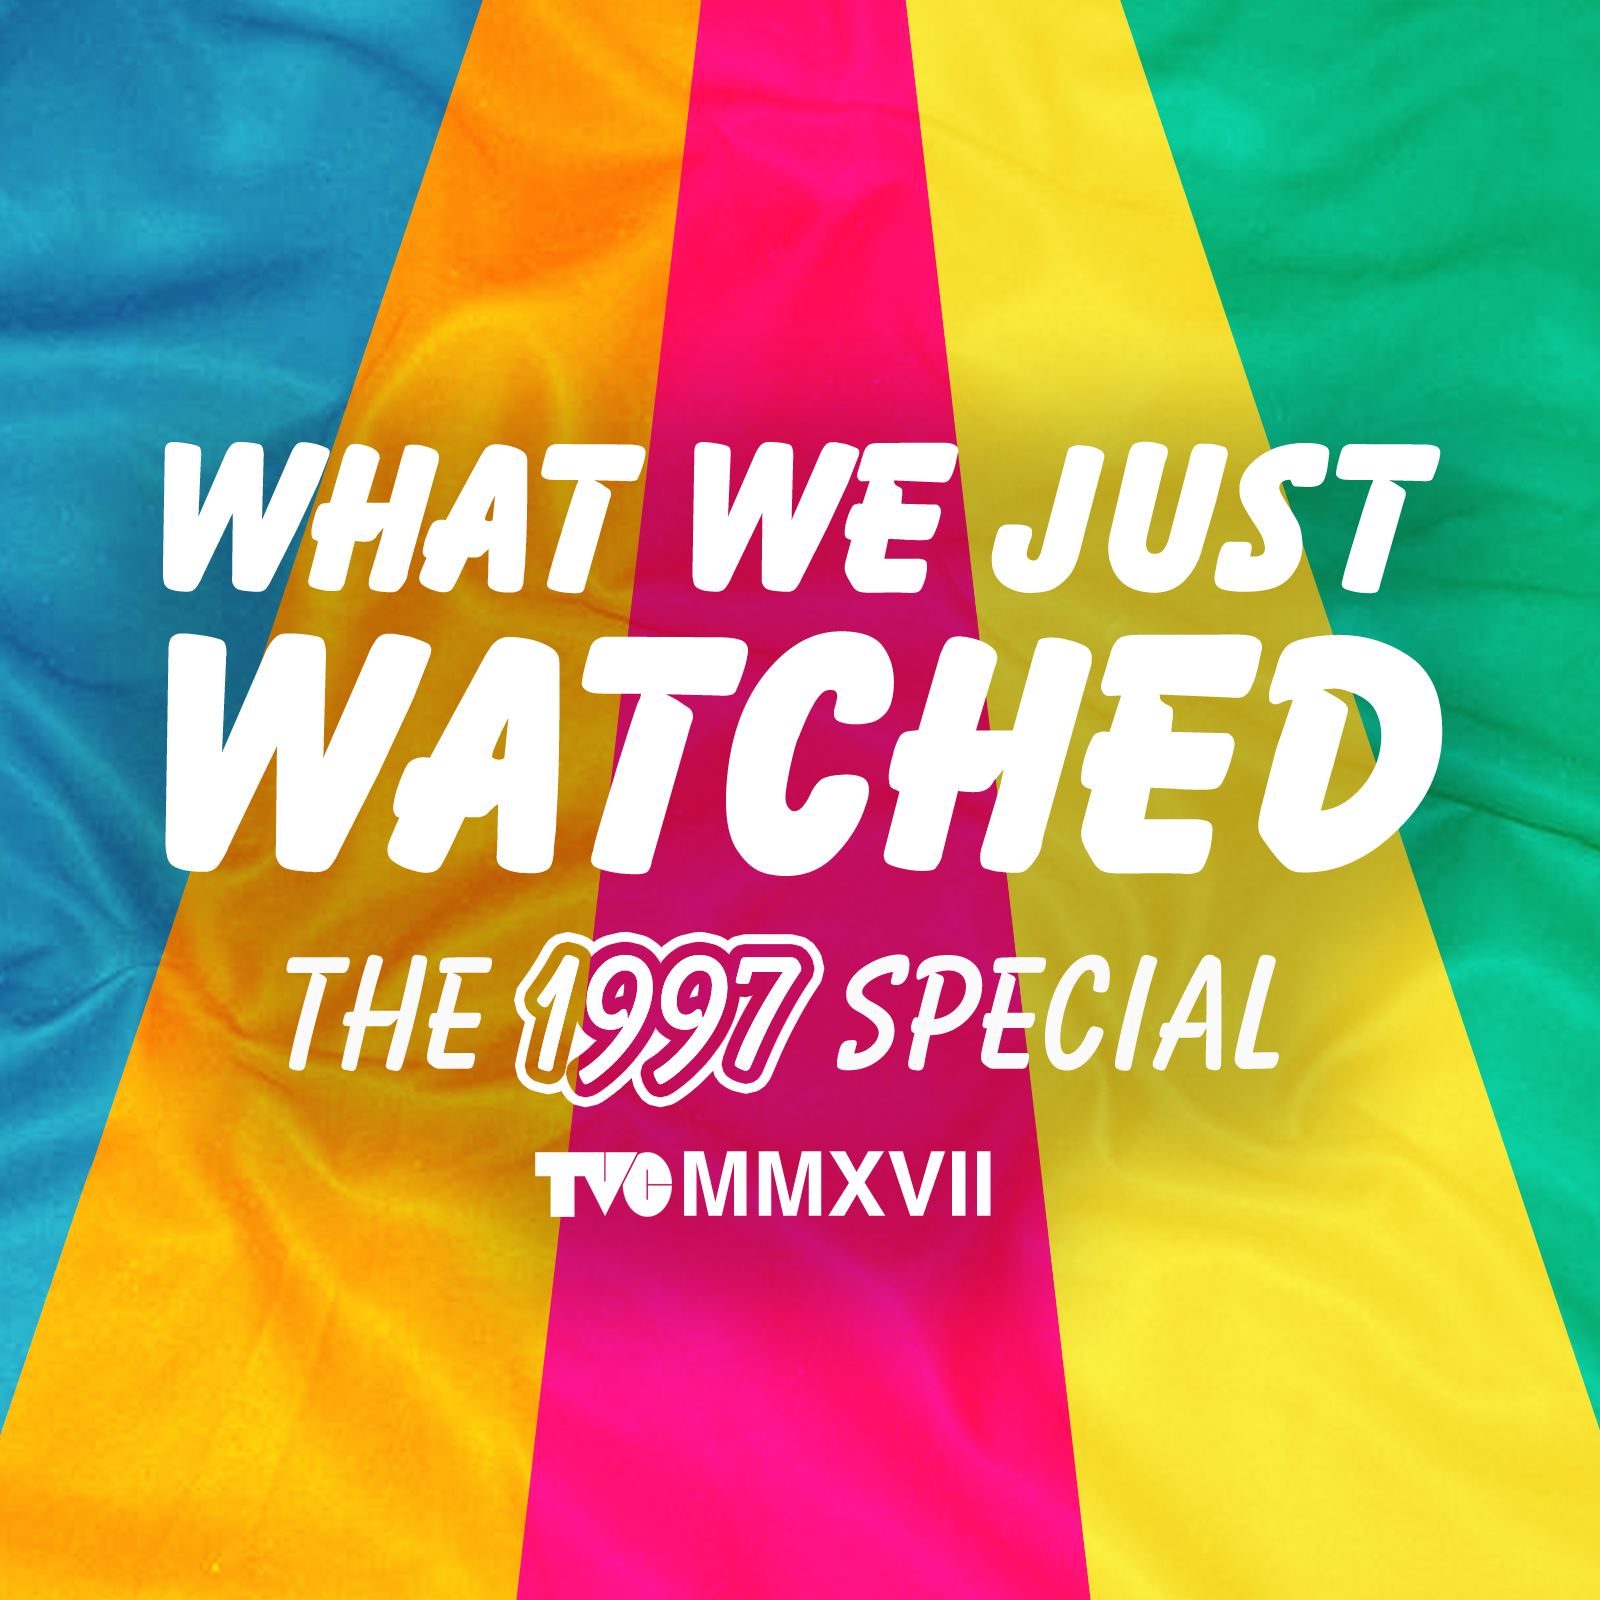 What We Just Watched - The 1997 Special